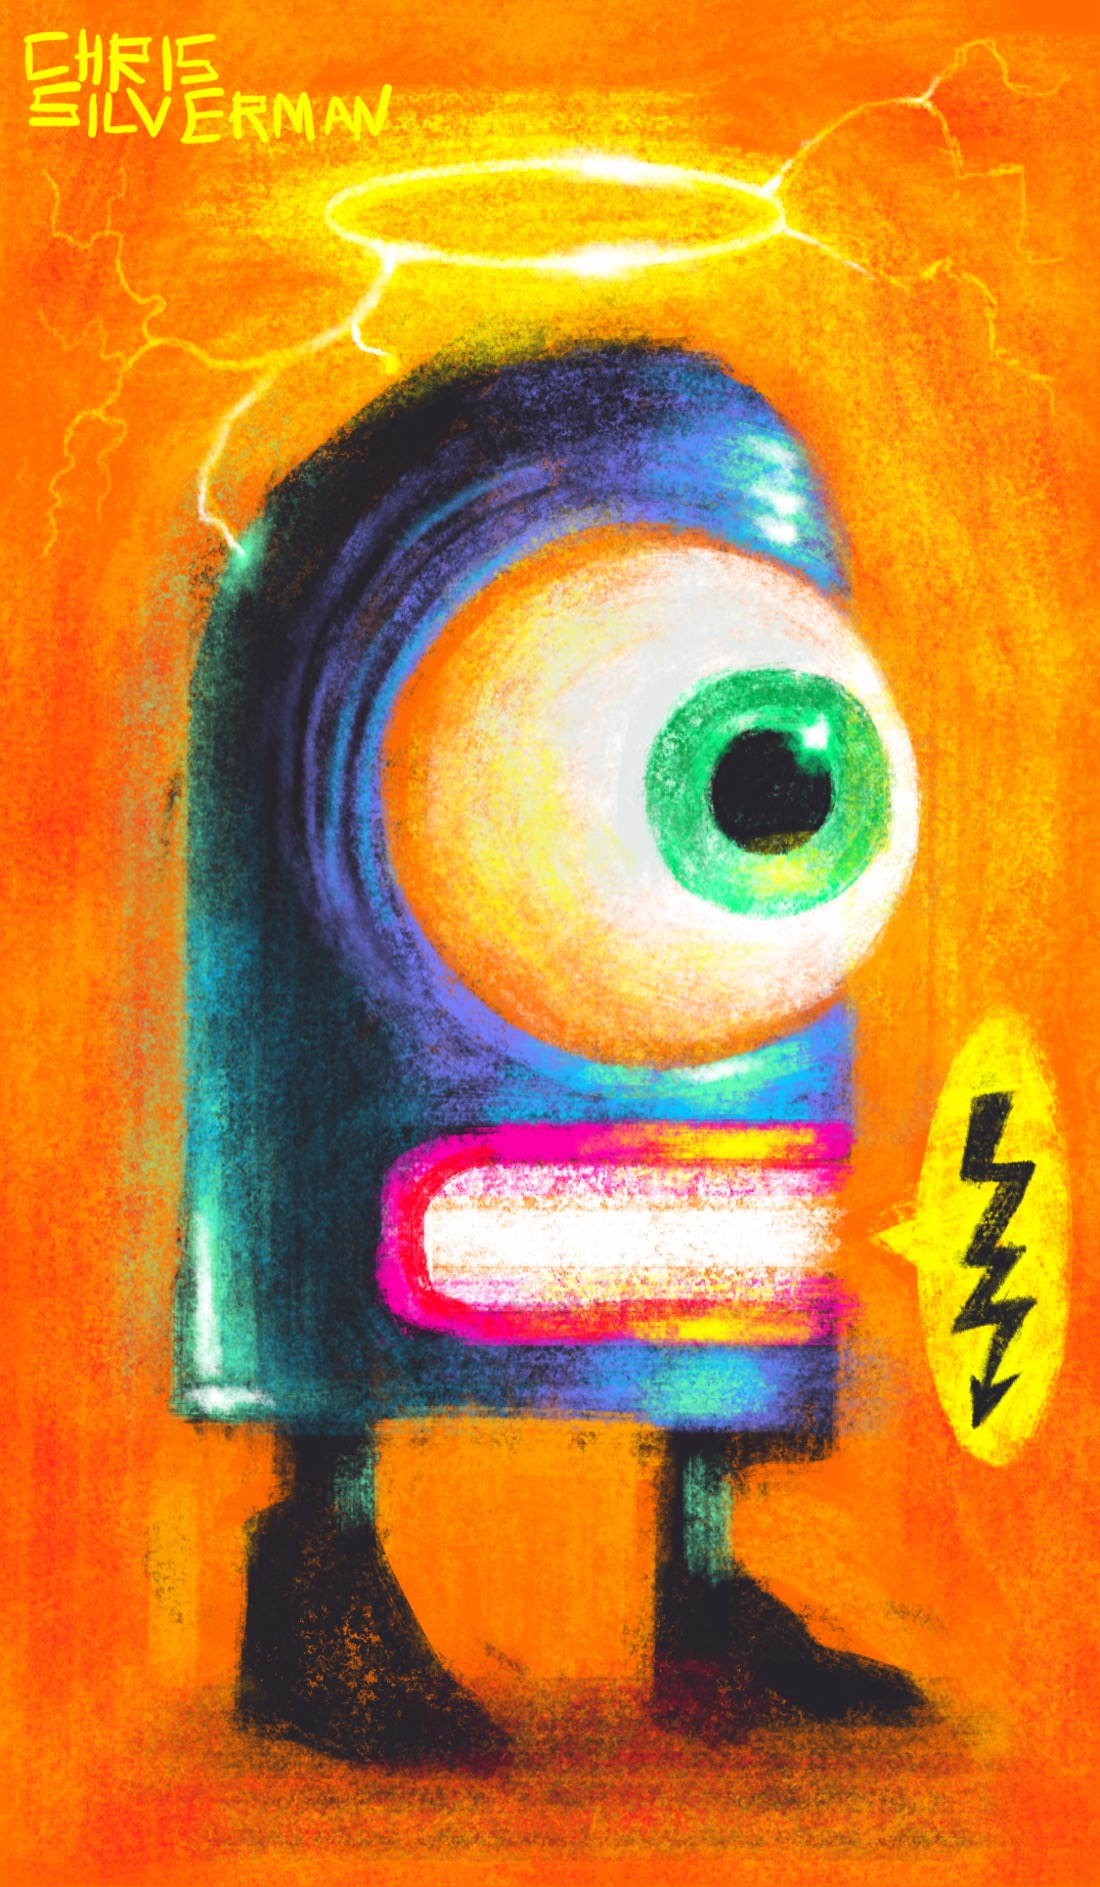 A creature shaped like a bullet, or a spraycan. The creature has a metallic body, one giant green eyeball that takes up most of its body, and a mouth pursed in a grimace, framed by crimson lipstick. Above it hangs a glowing yellow halo with bolts of electricity coming off it. A speech balloon is coming out of the creature's mouth; the balloon has no text, only an icon of a lightning bolt with an arrow at the end of it. The creature appears to be wearing boots or galoshes. This is a bluish creature set on an orange background.